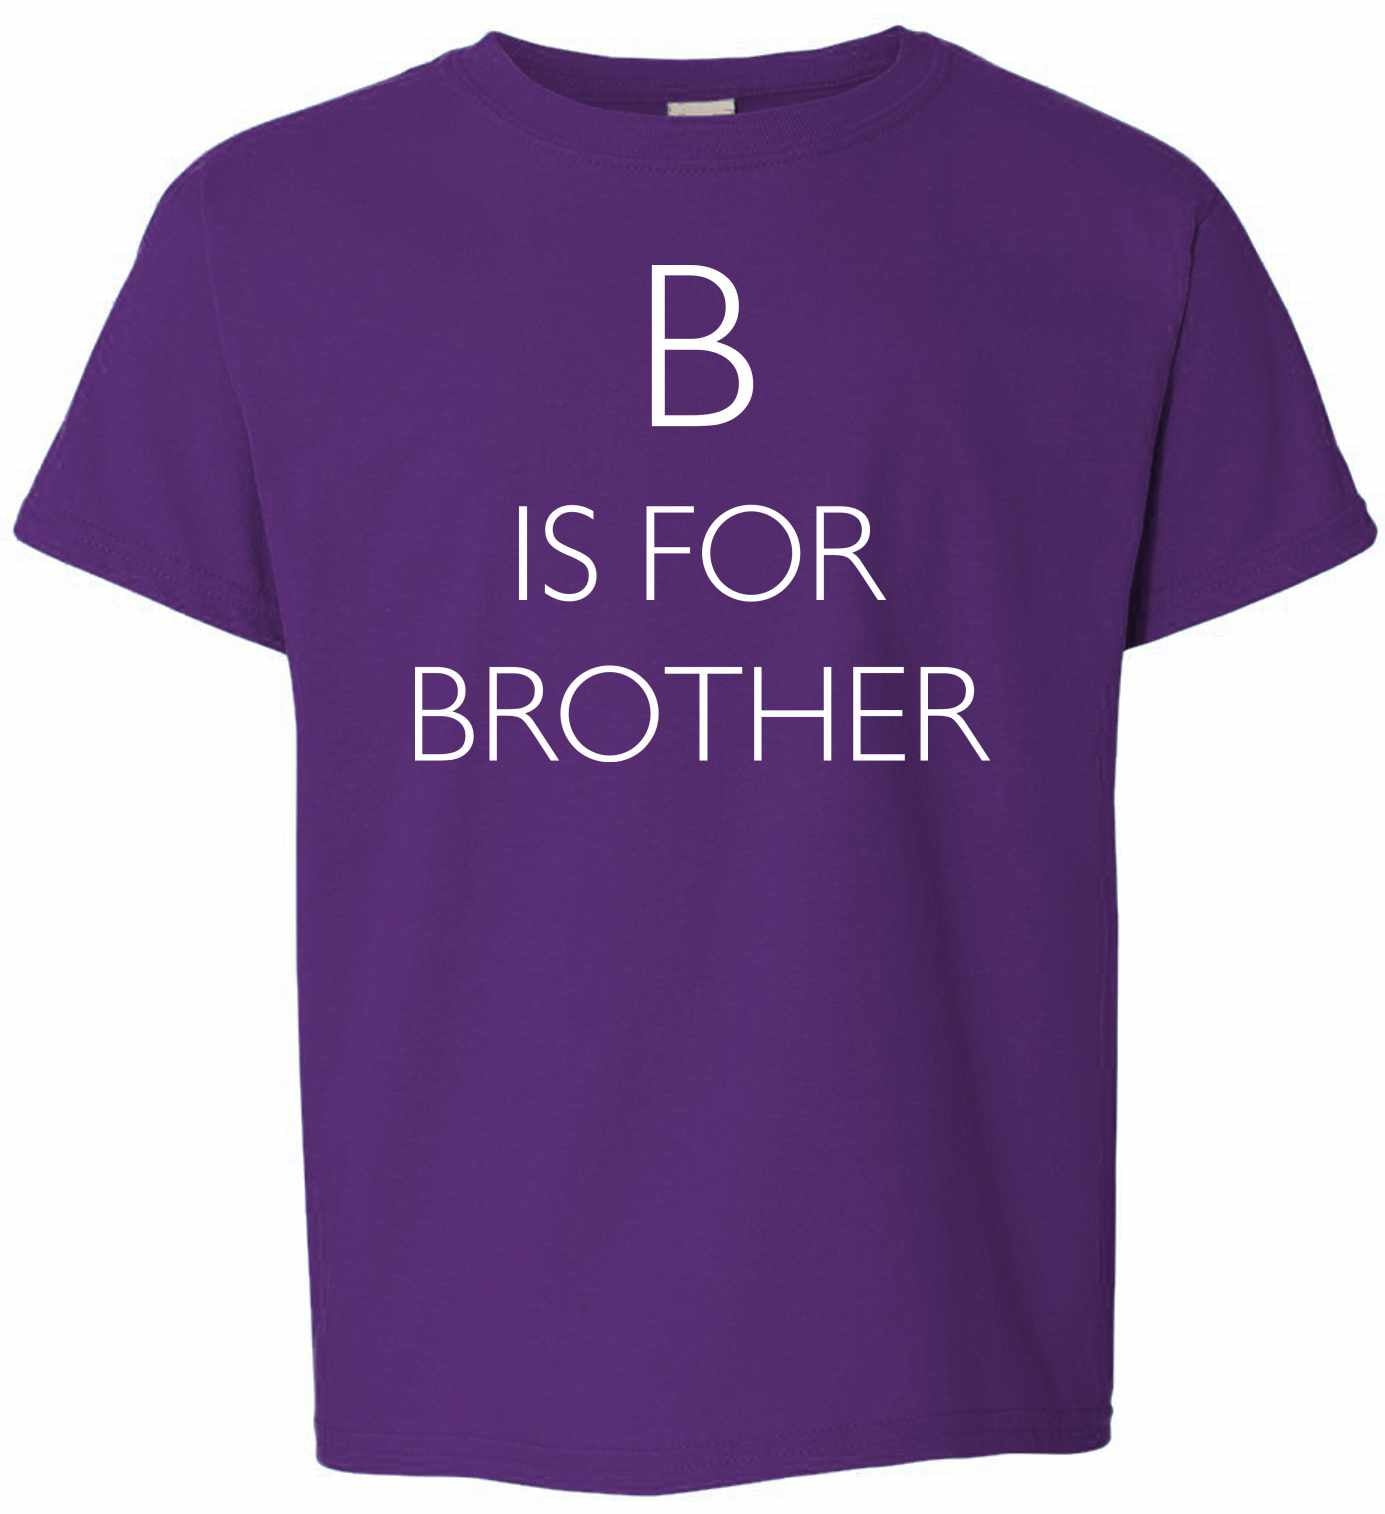 B is for Brother on Youth T-Shirt (#1009-201)